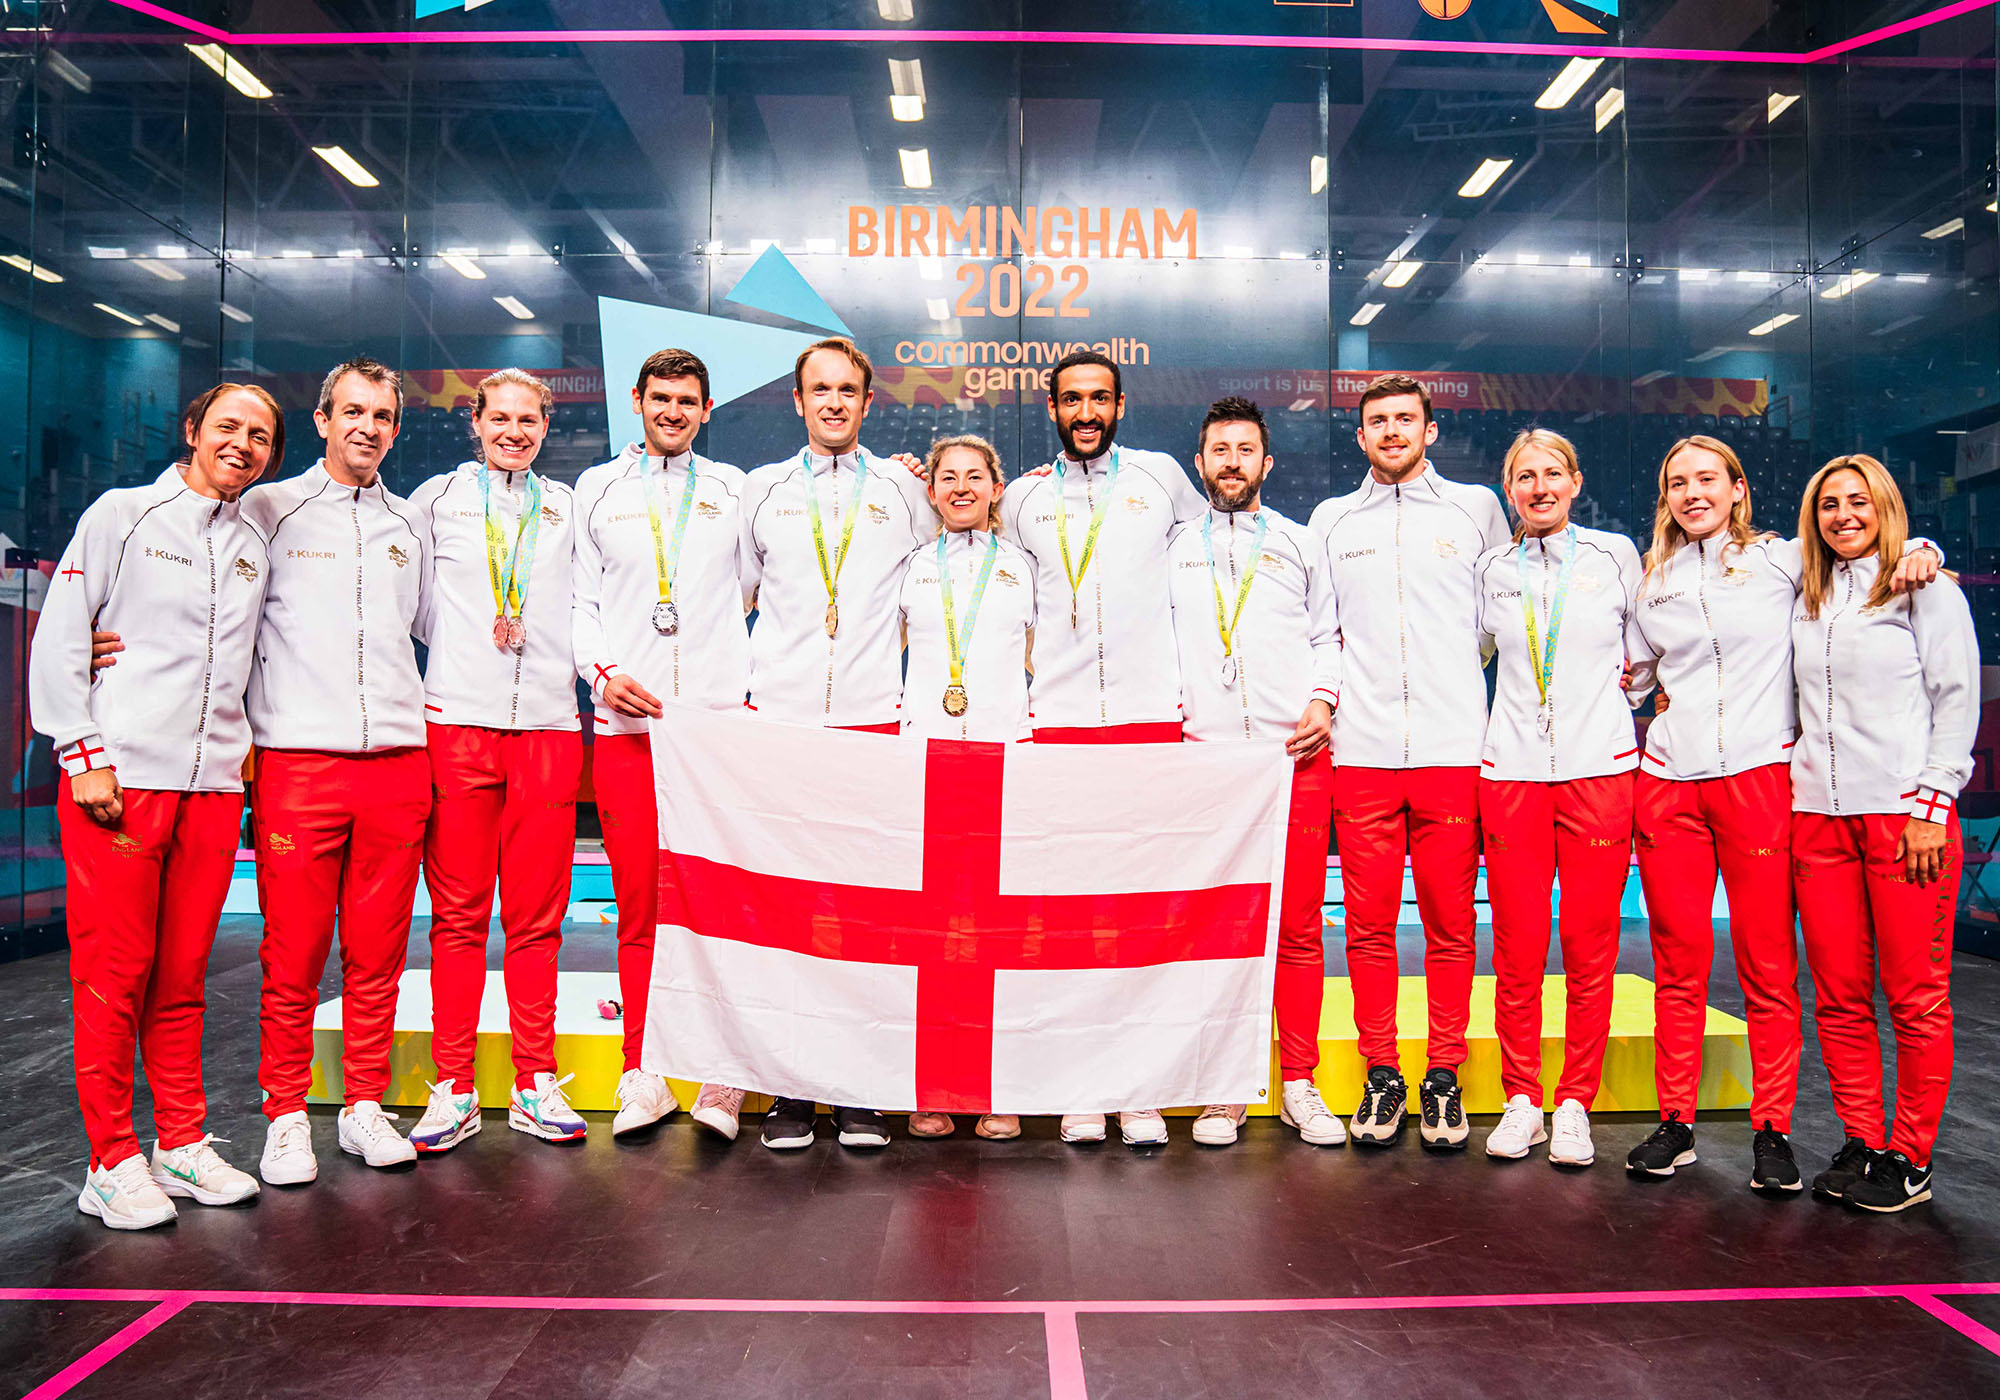 Team England at the 2022 Commonwealth Games